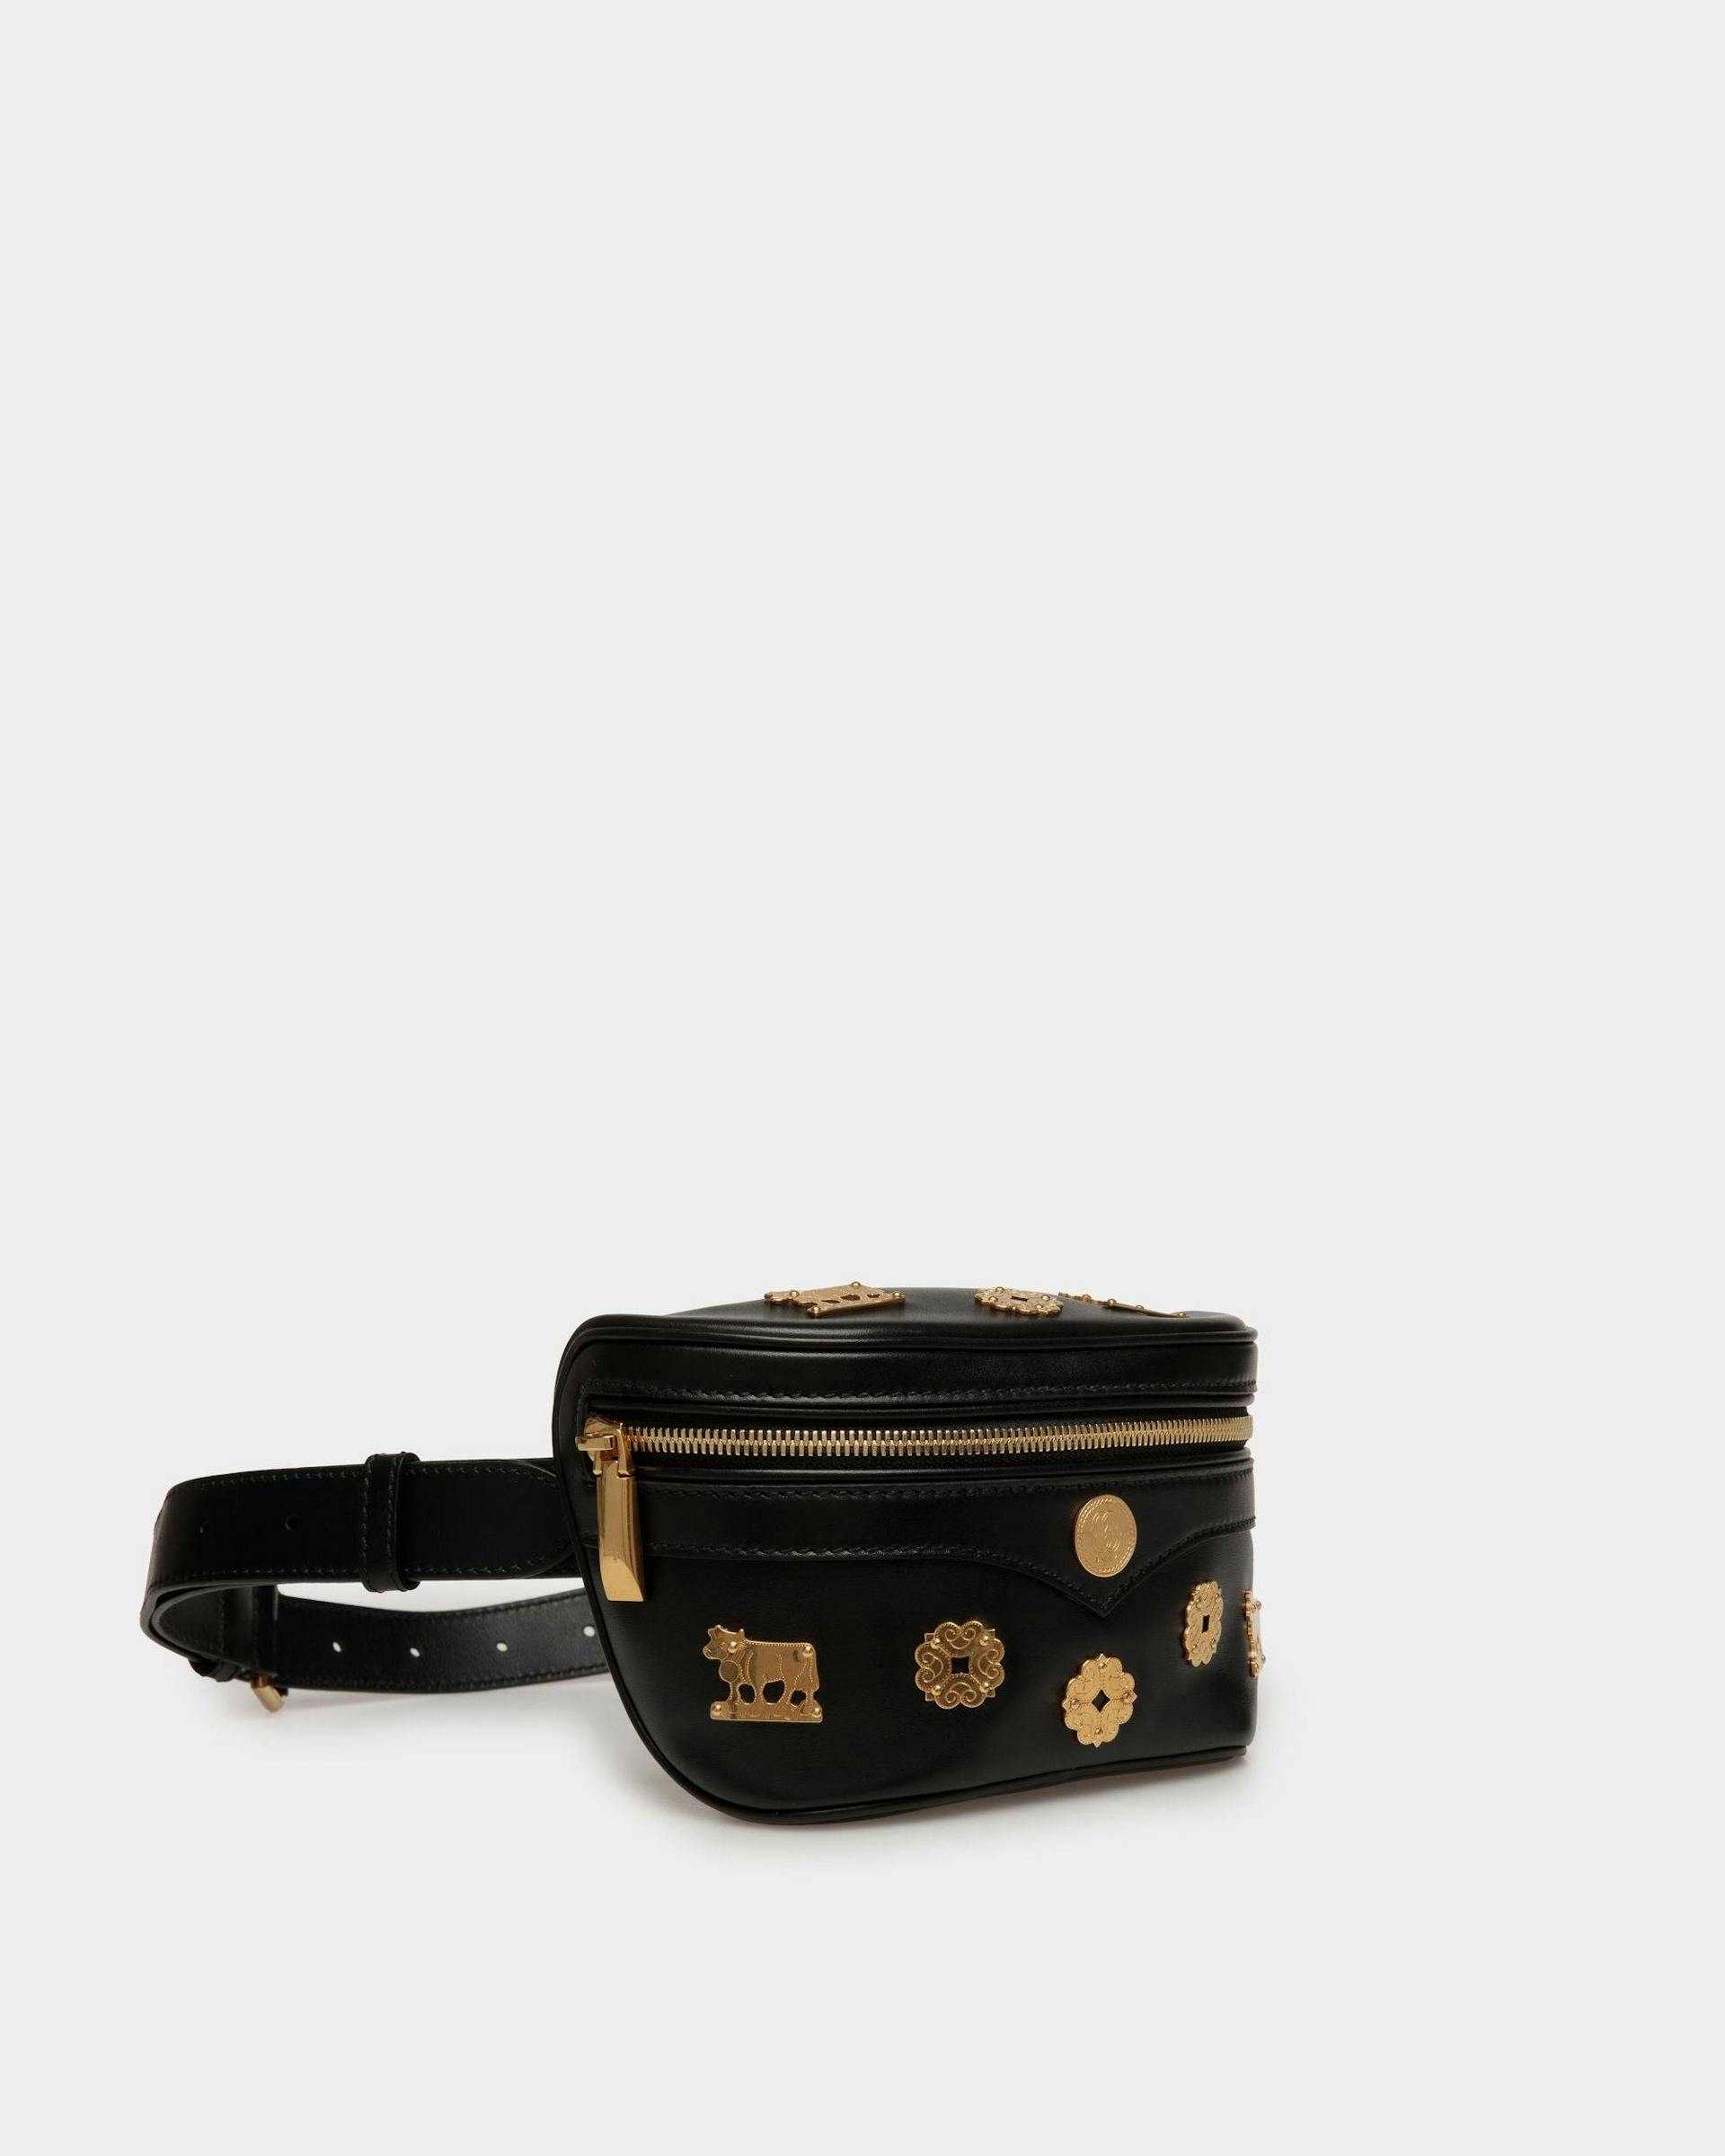 Women's Moutain Belt Bag  in Black Leather | Bally | Still Life 3/4 Front